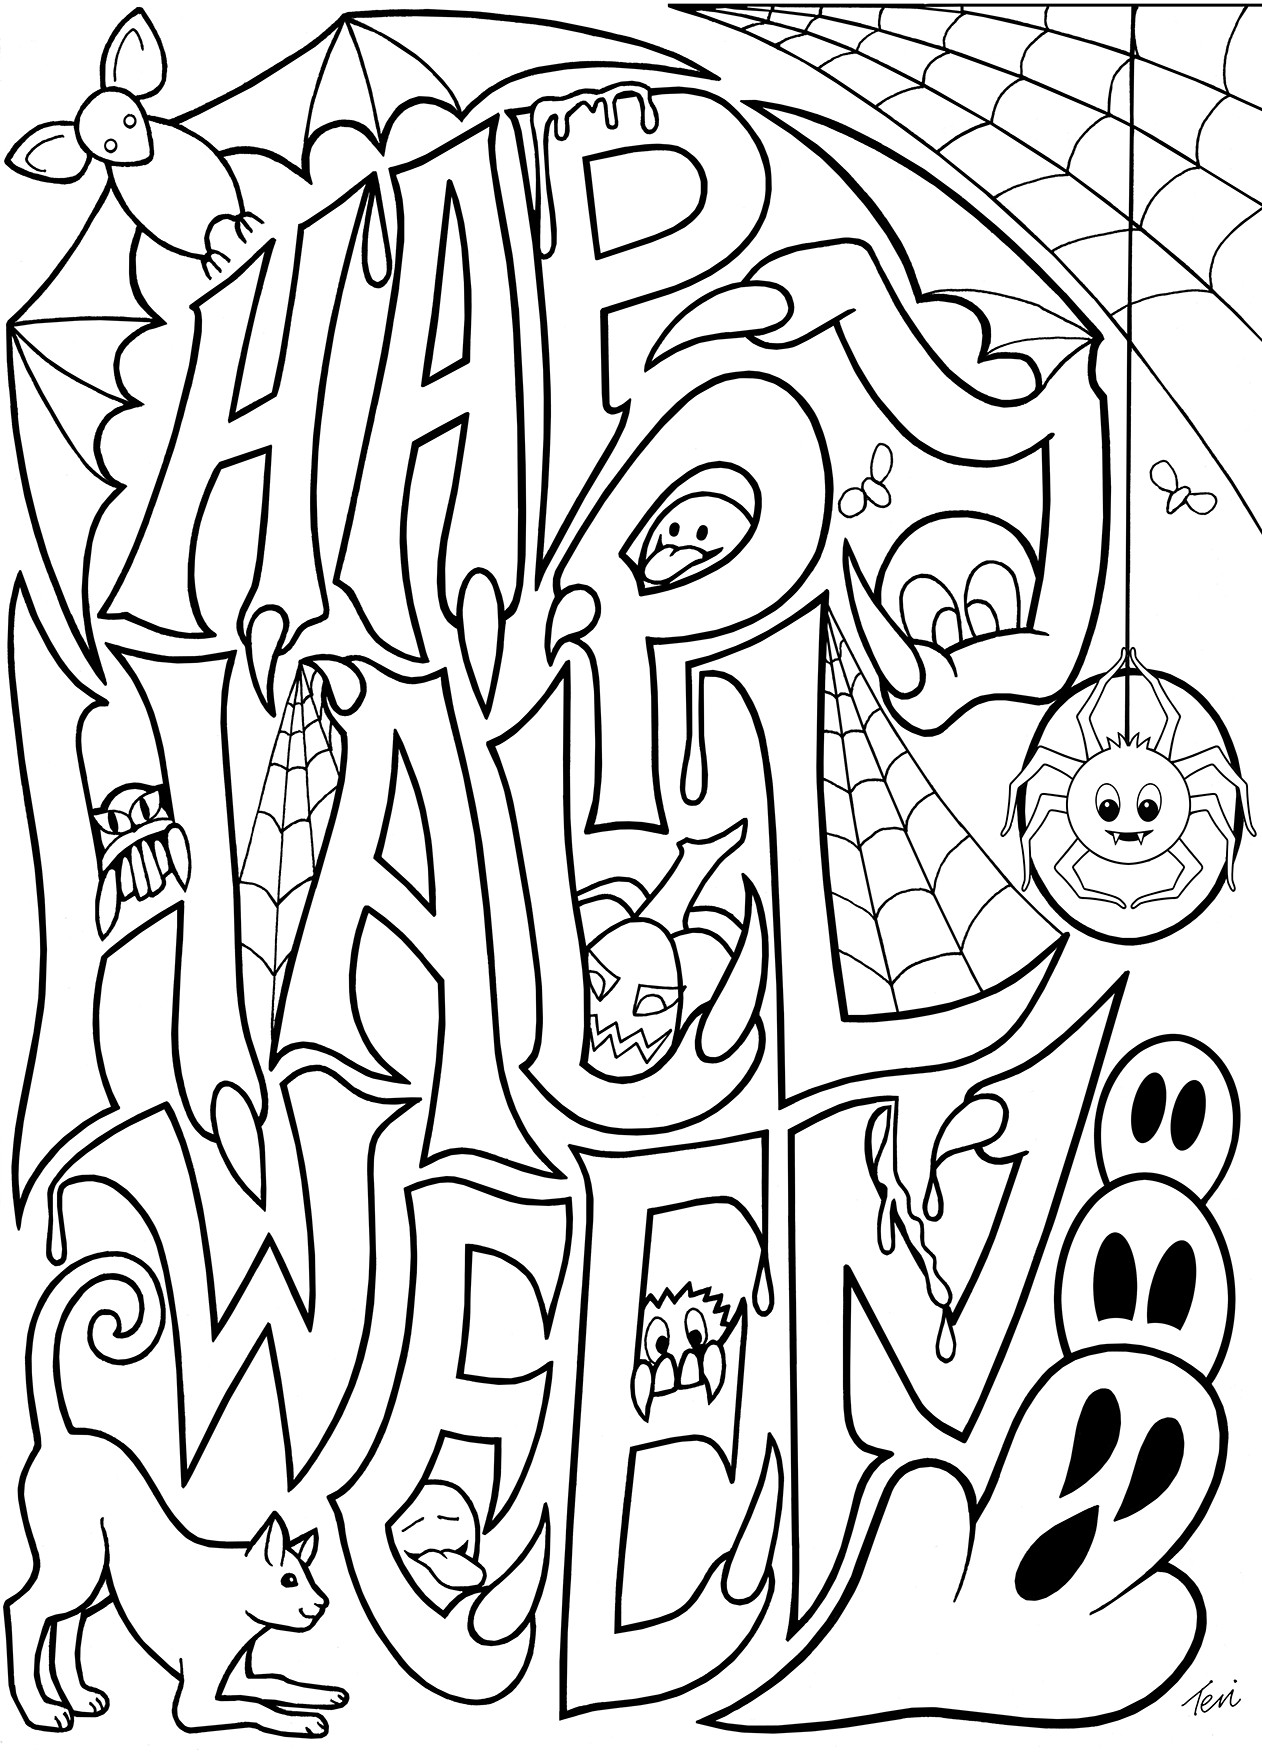 Printable Coloring Pages Halloween
 Free Adult Coloring Book Pages Happy Halloween by Blue